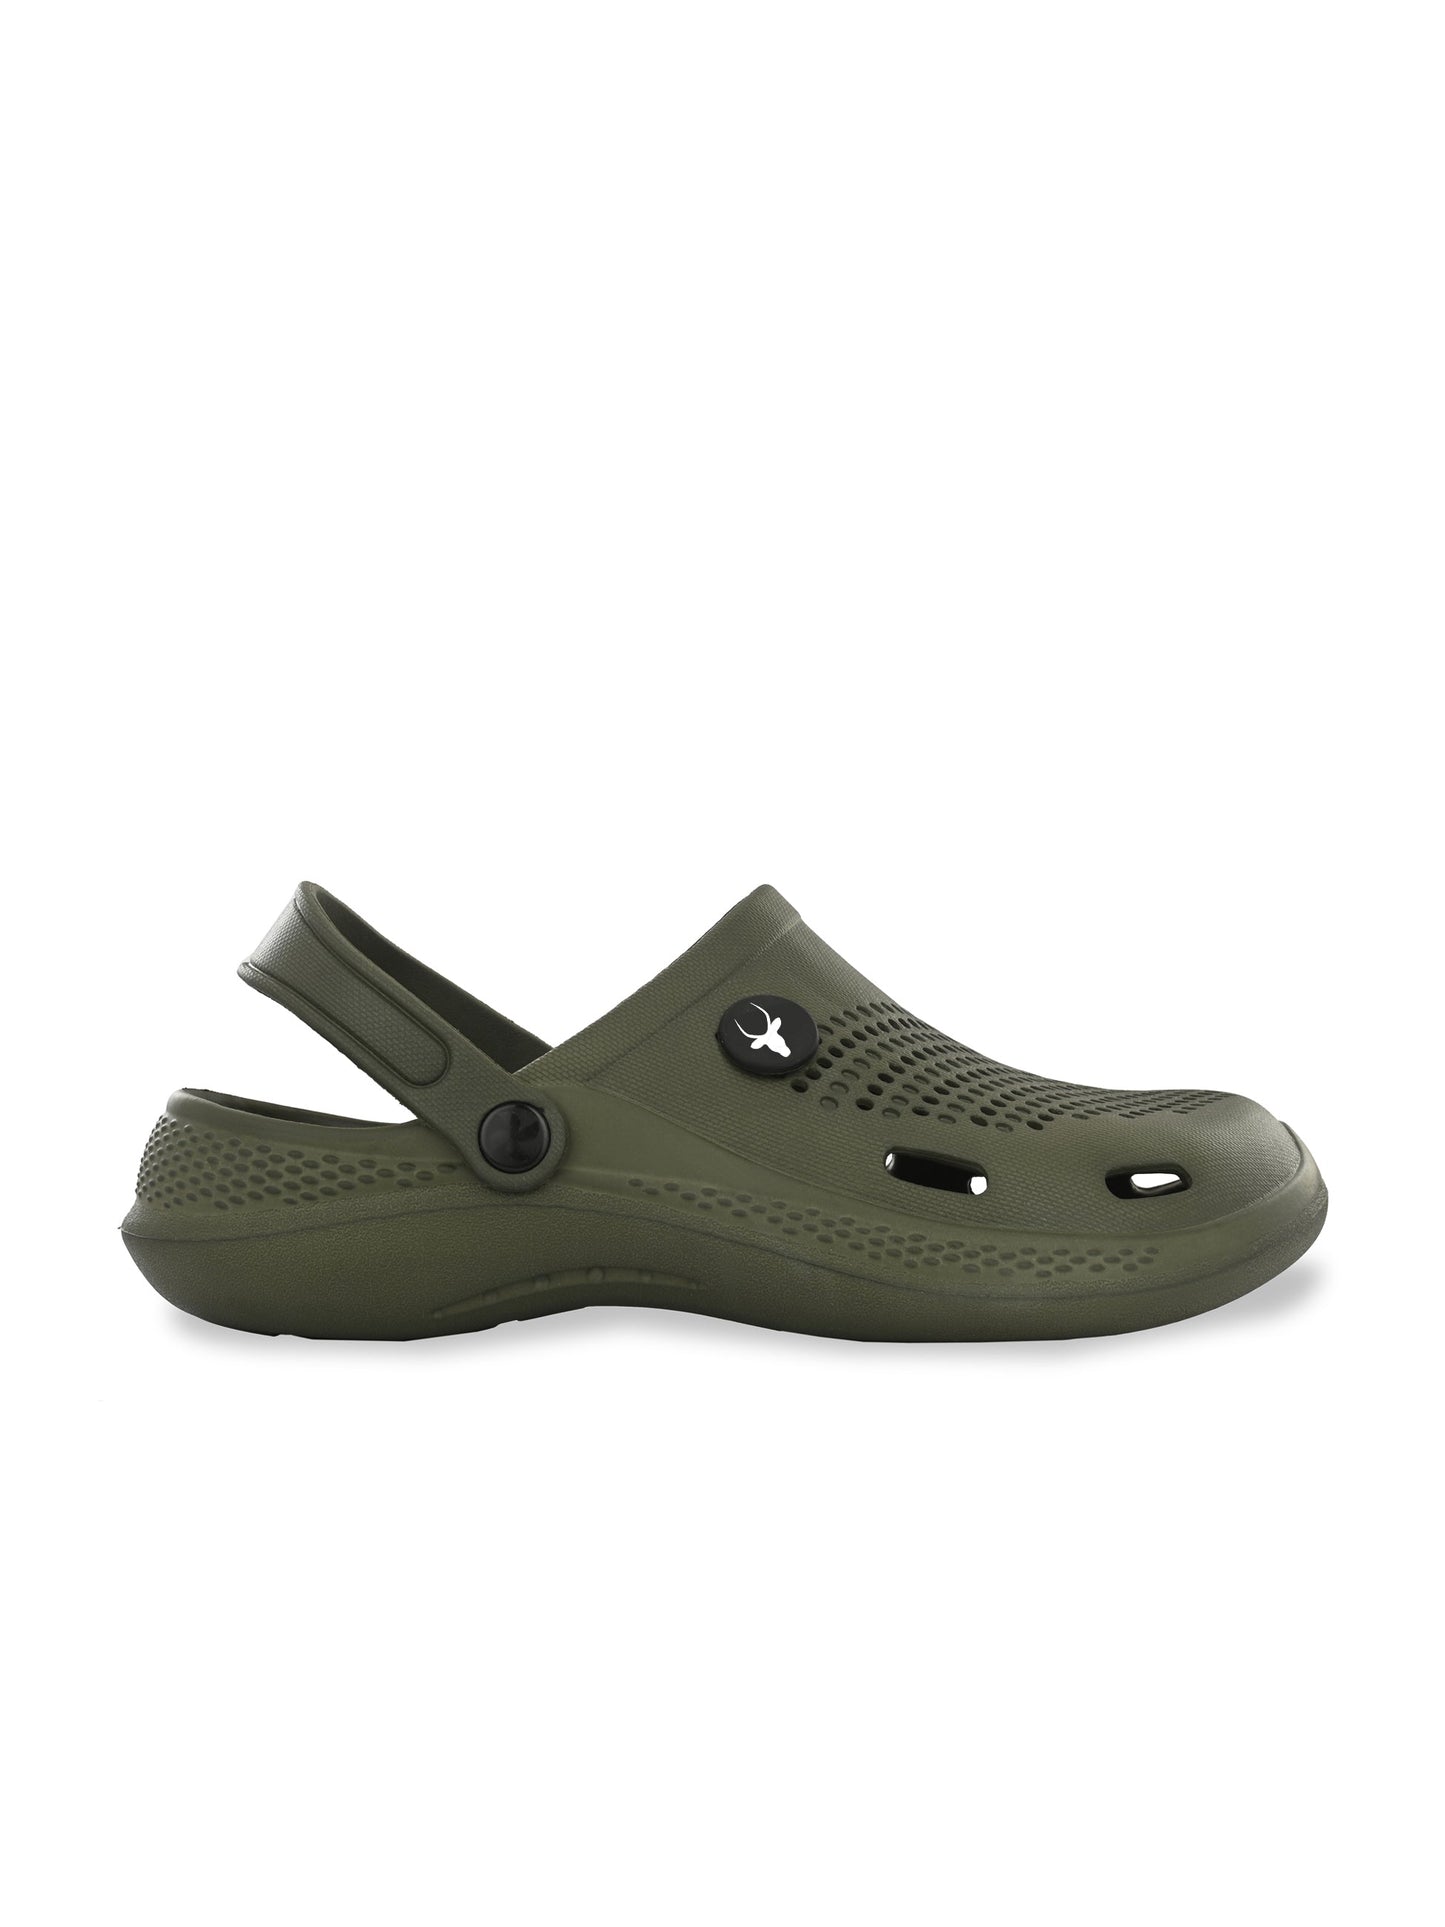 Hirolas® Men's Green Cushioned Fluffy Comfortable Slider Clogs (HROMCL06GRN)